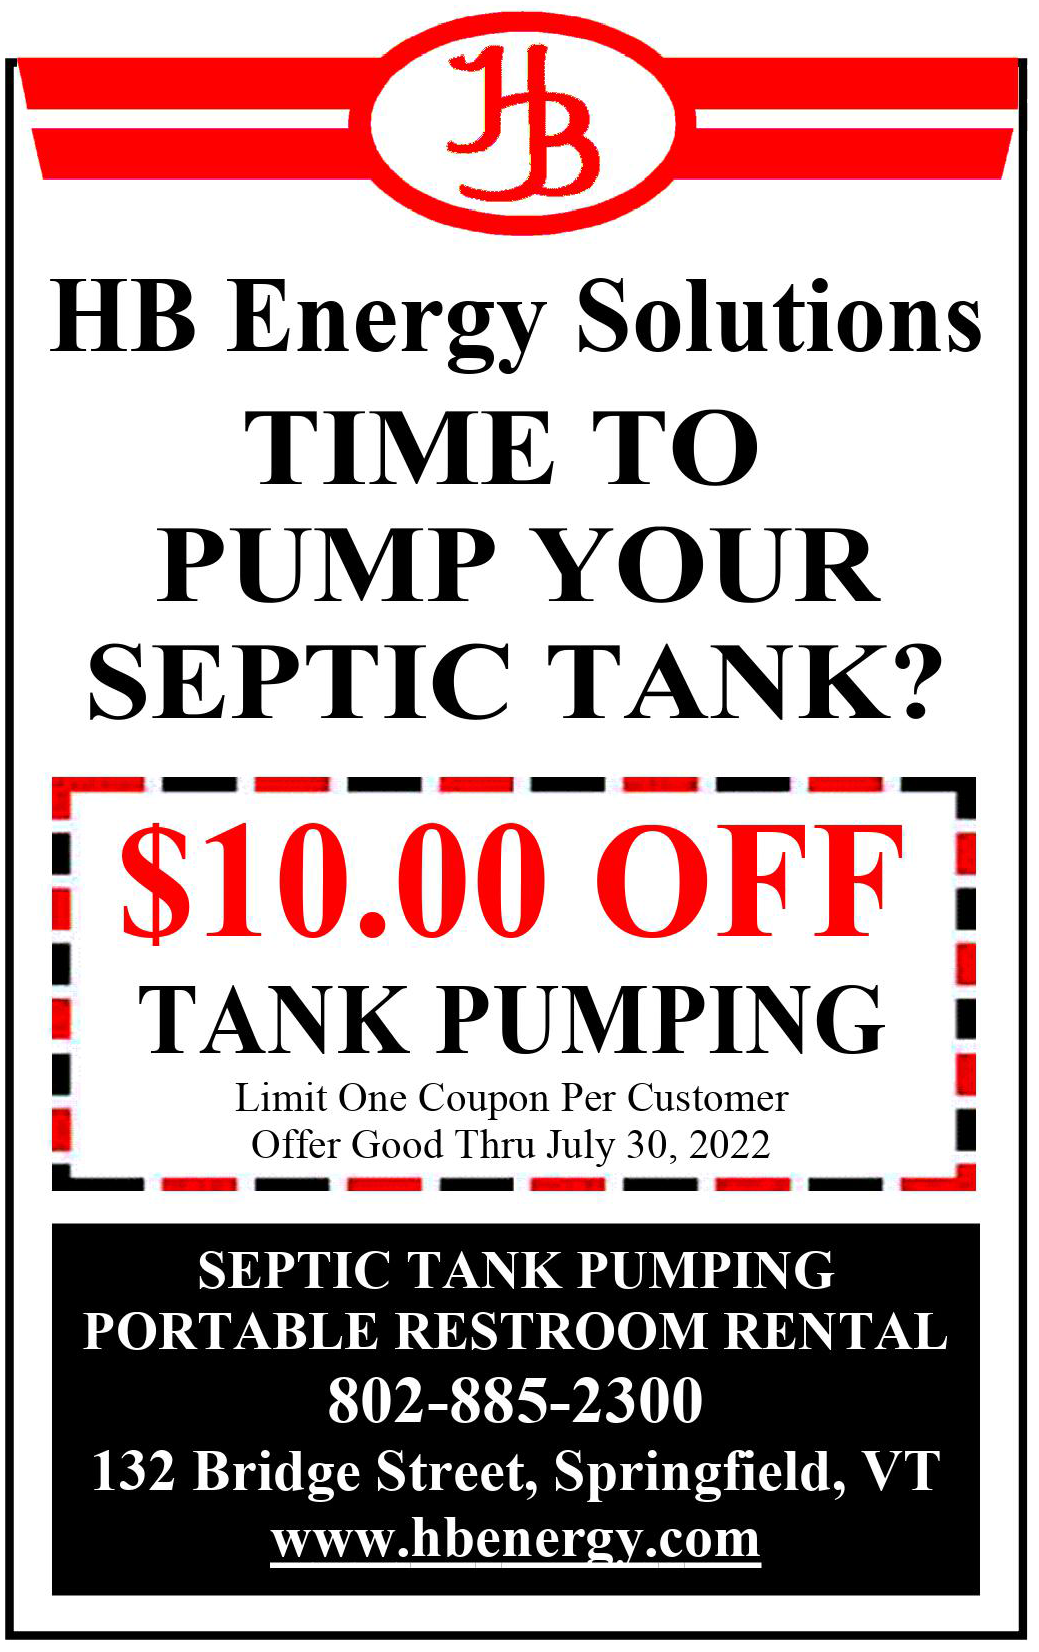 Septic pumping coupon image - $10.00 off septic tank pumping until July 30th